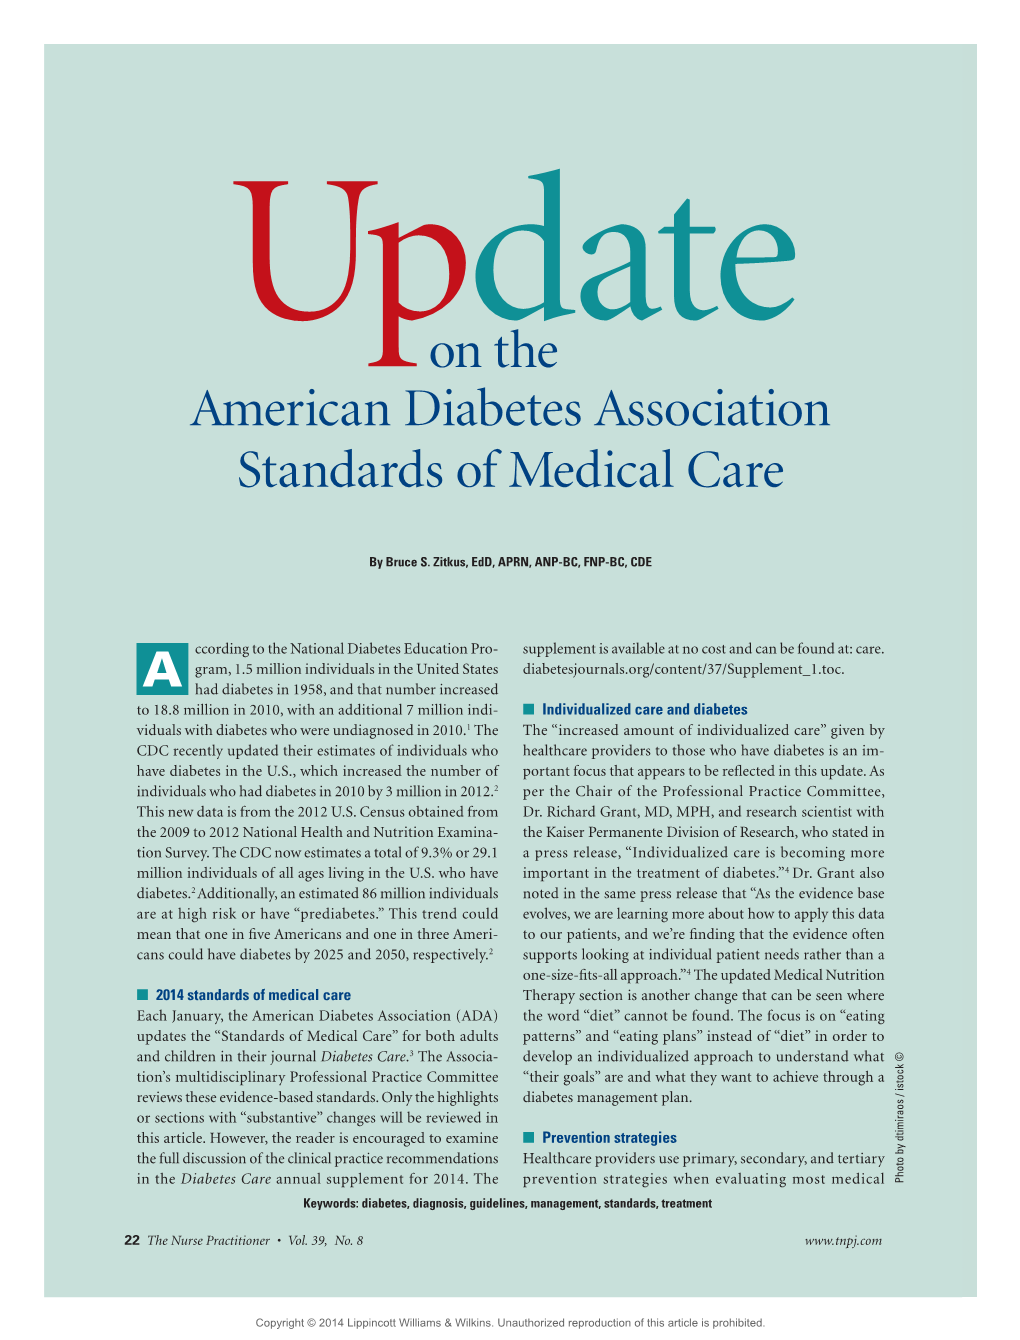 On the American Diabetes Association Standards of Medical Care